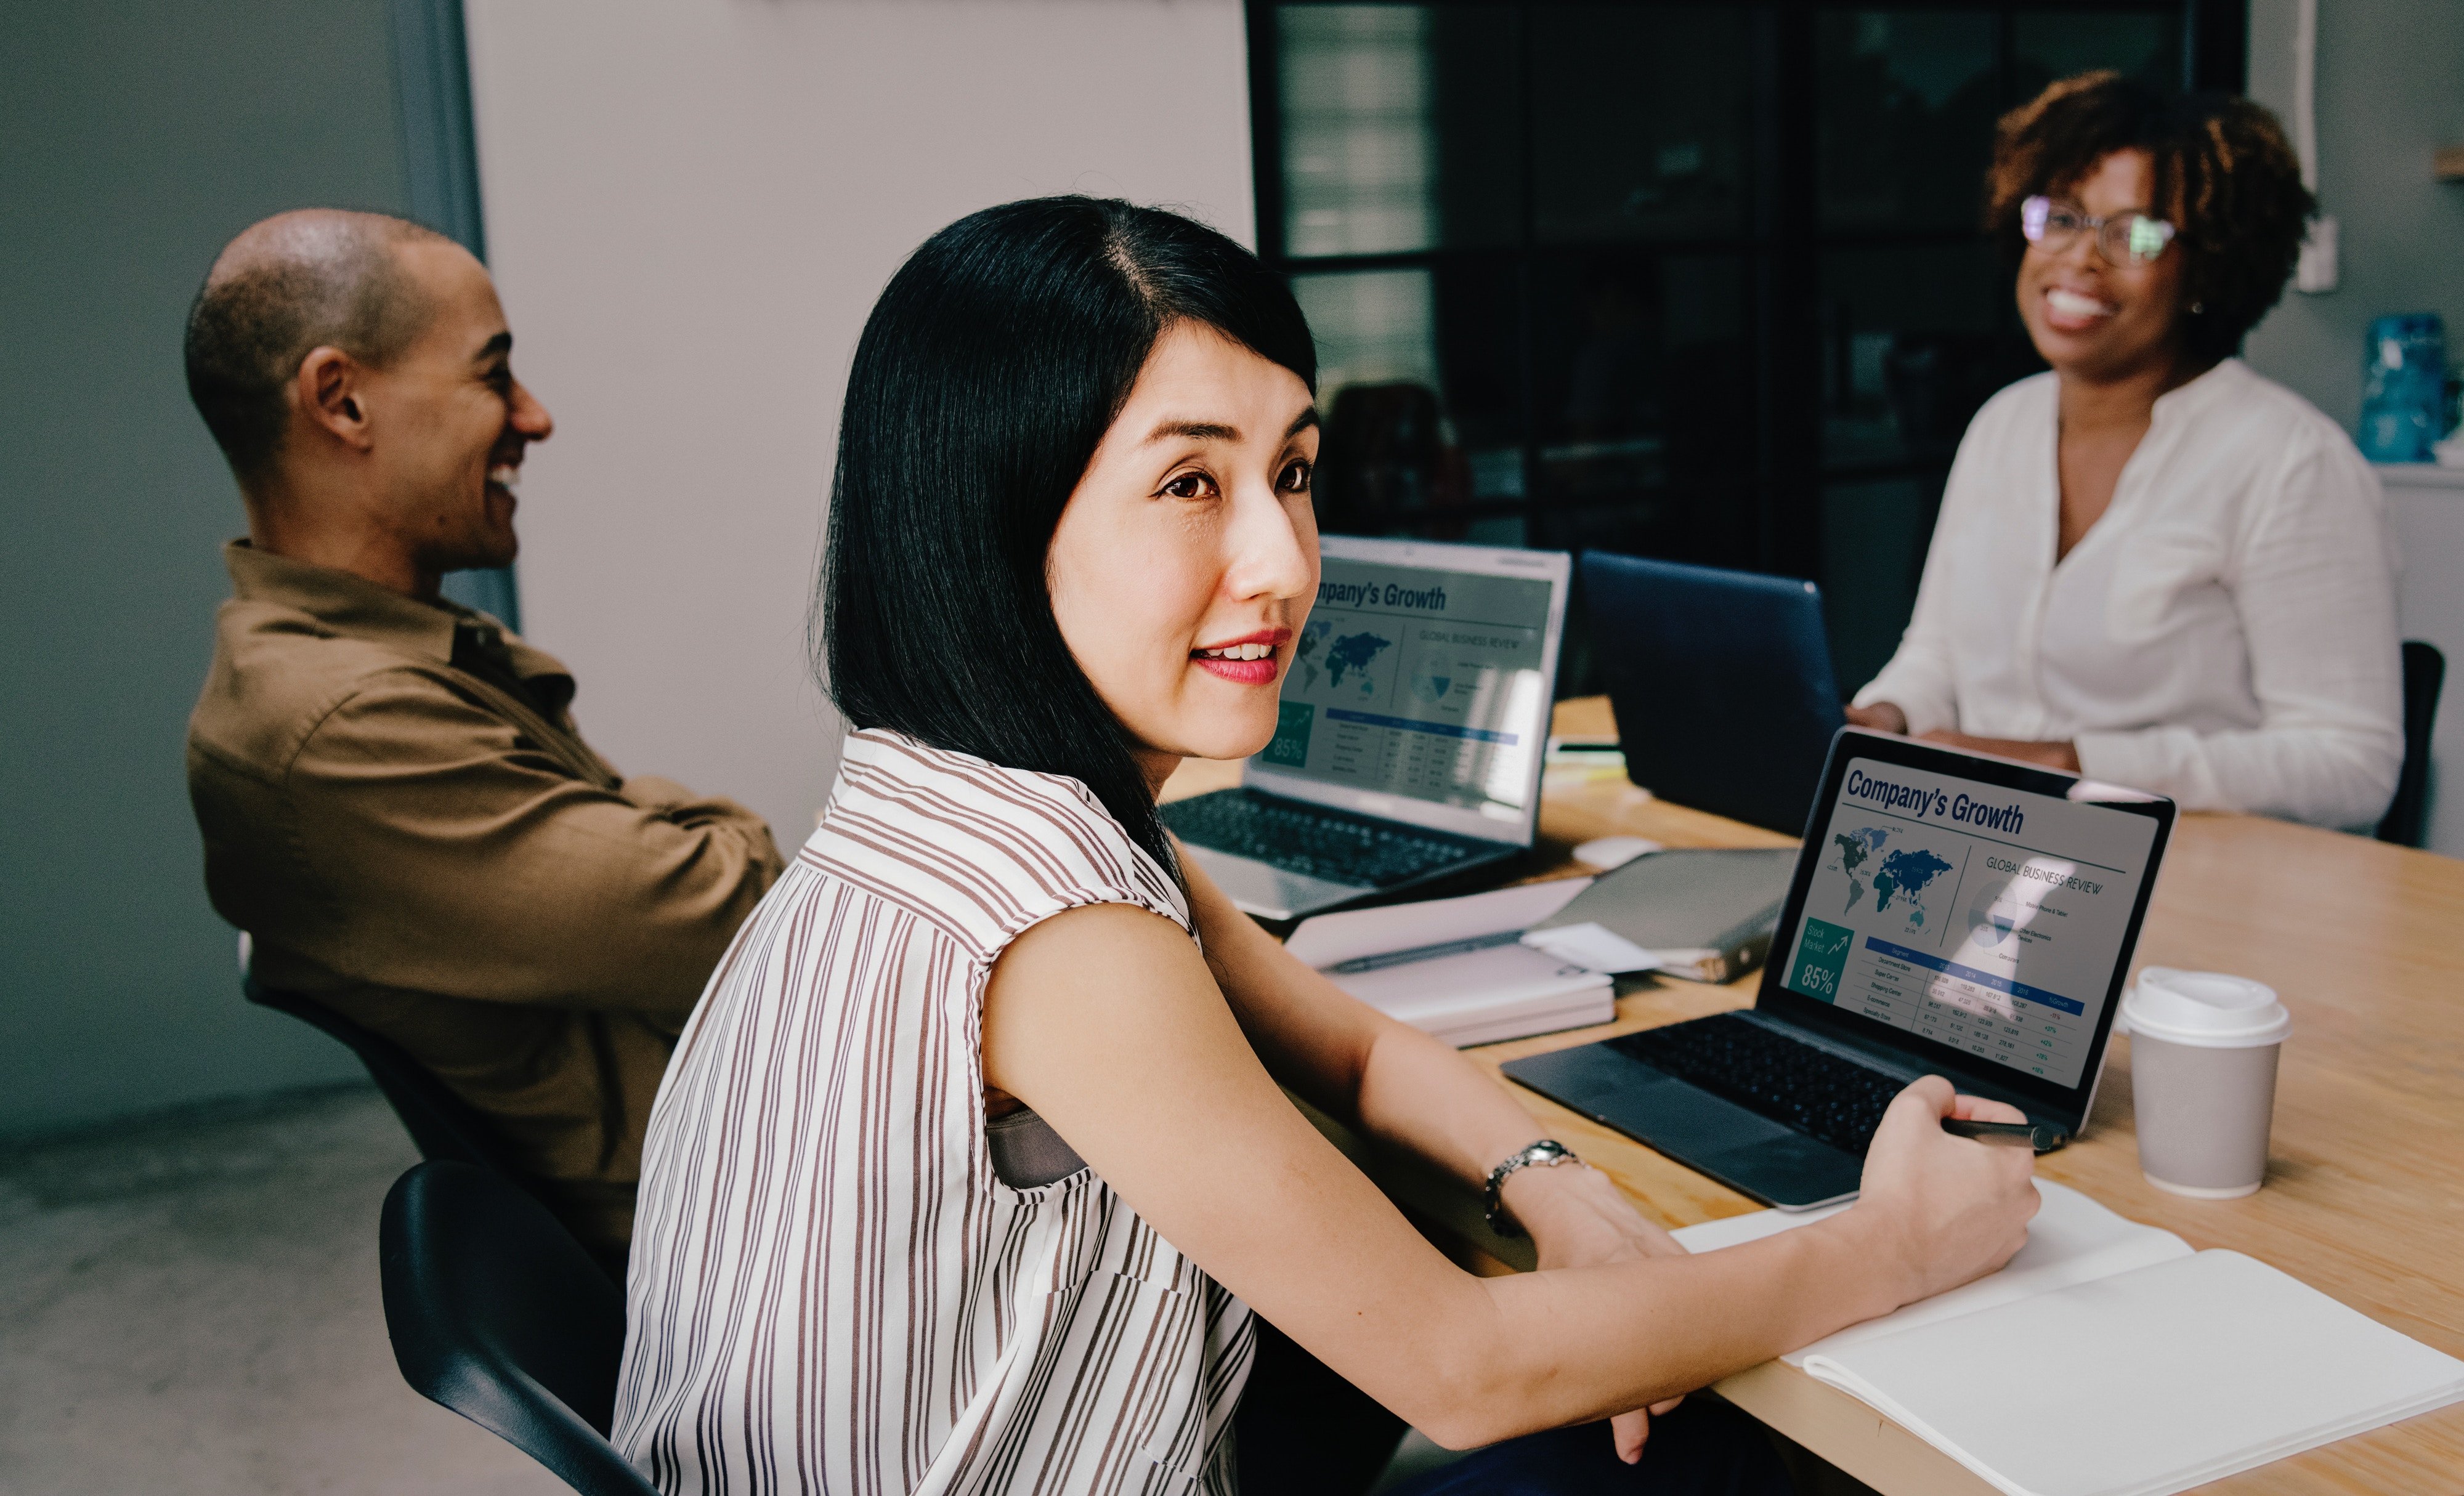 Employee engagement and productivity in 2019